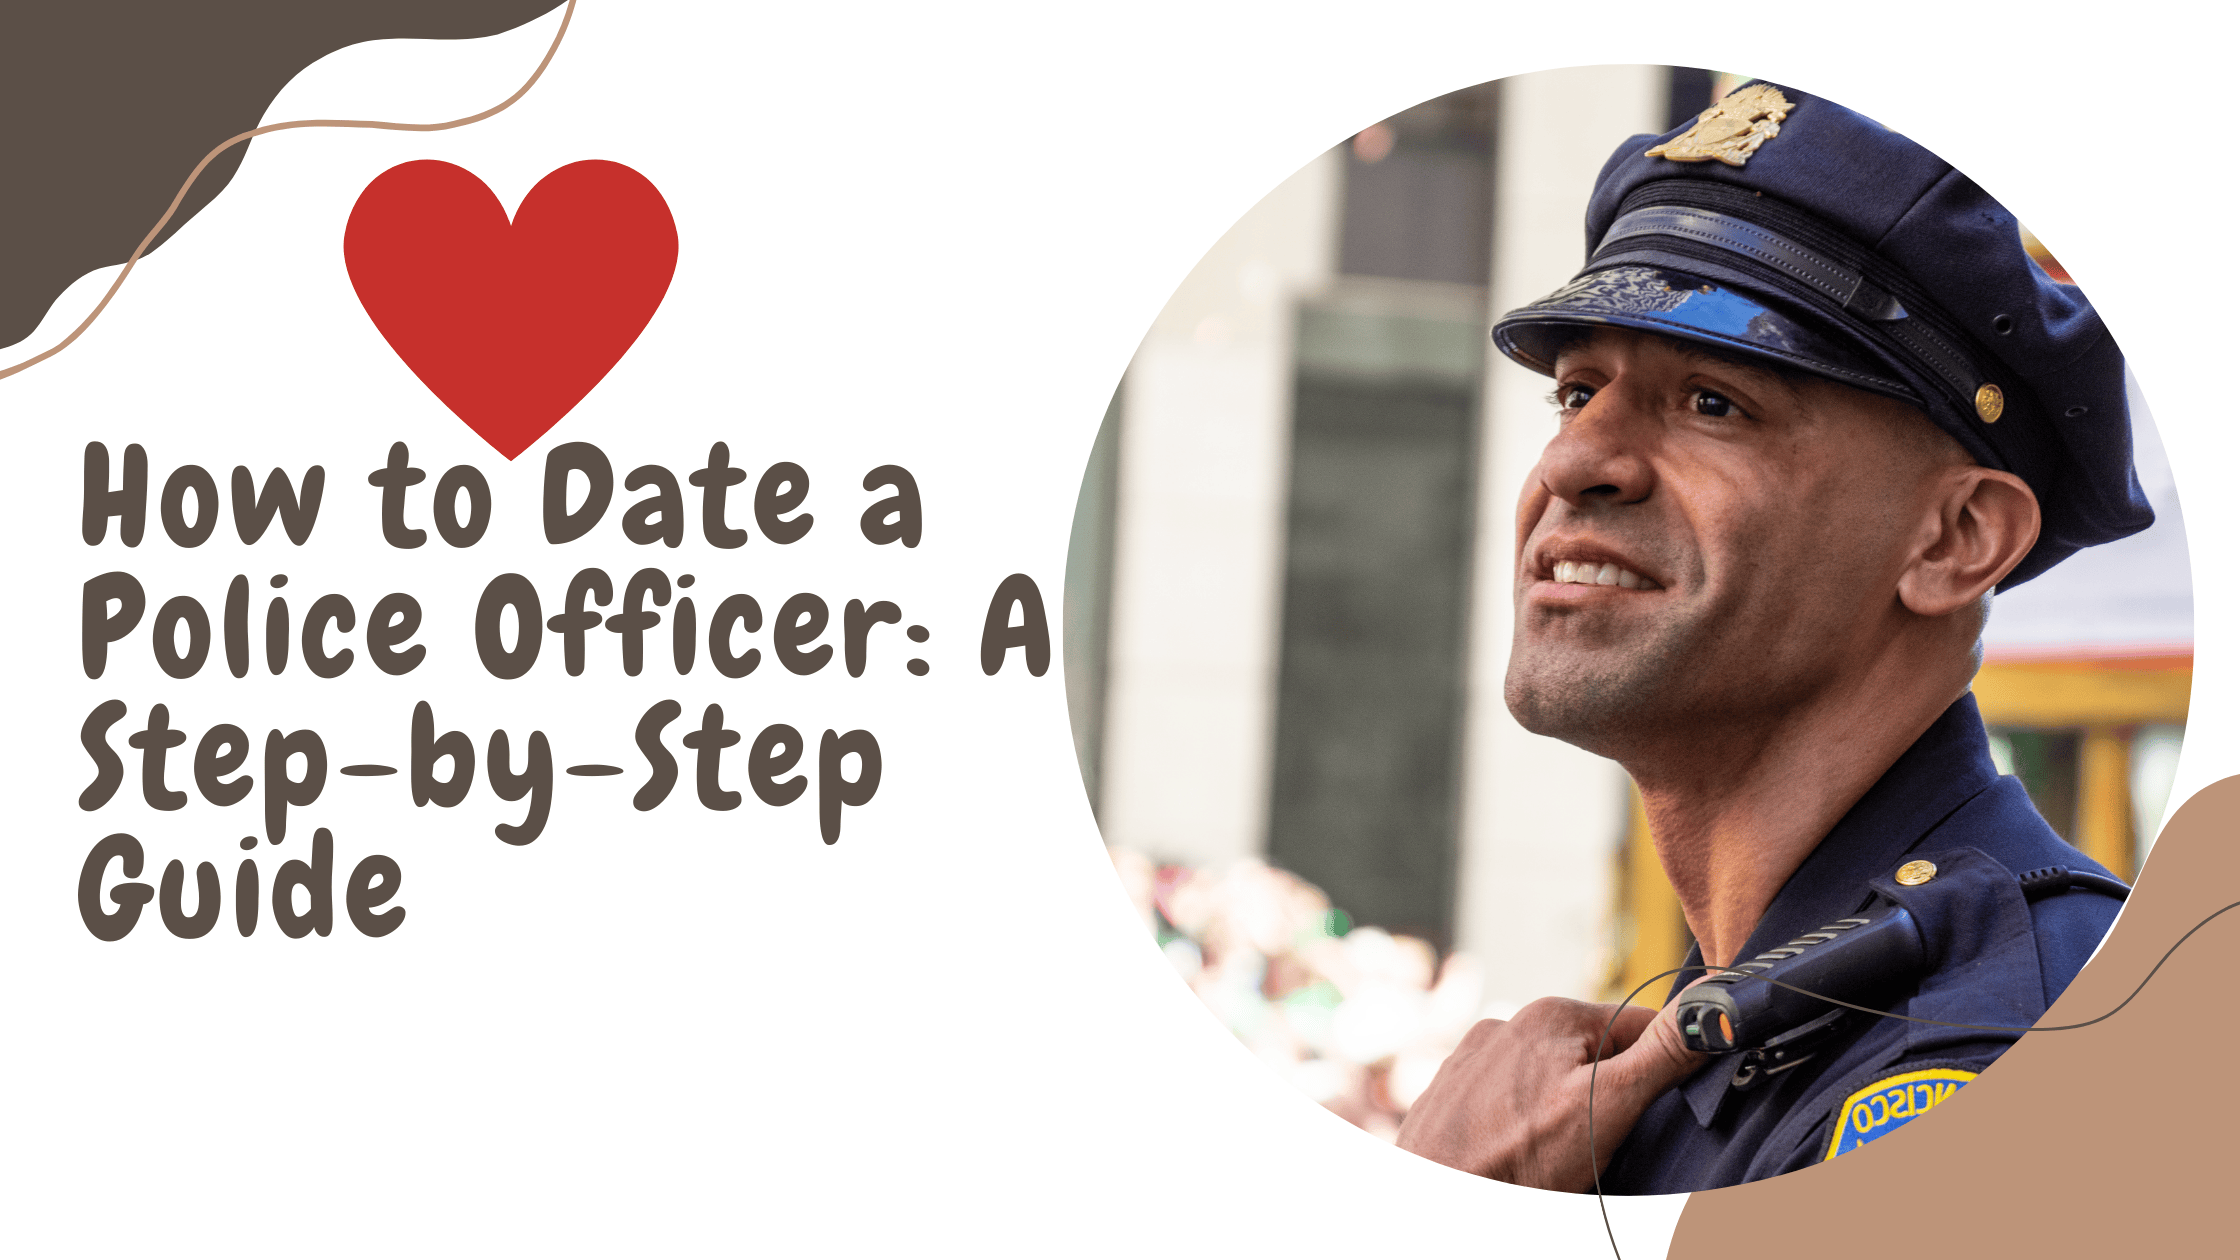 How to Date a Police Officer: A Step-by-Step Guide